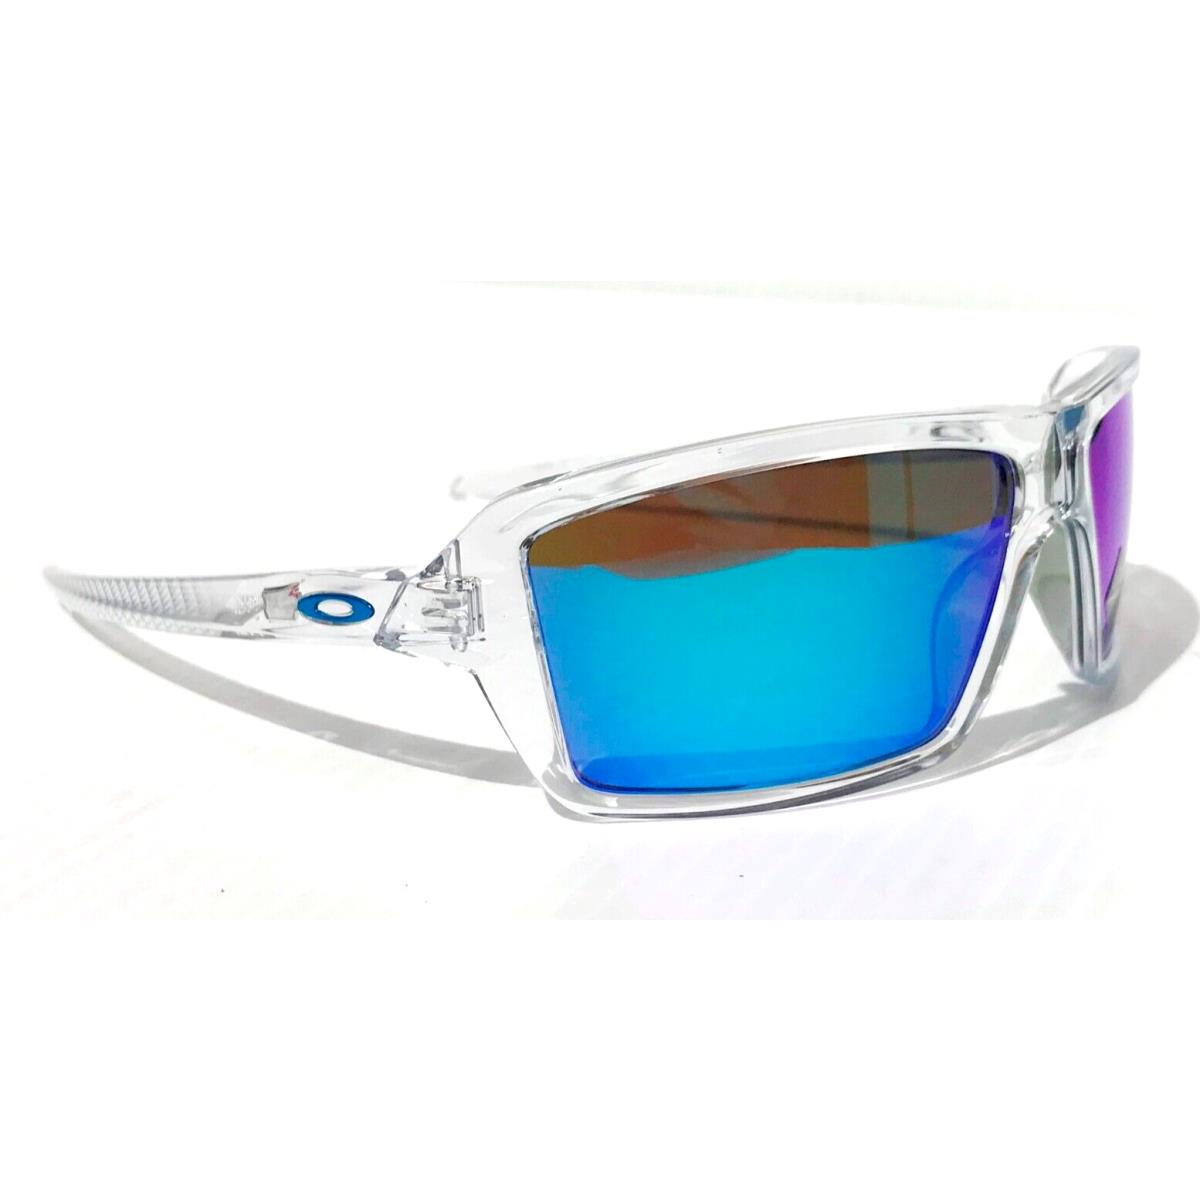 Oakley sunglasses Cables - Clear Frame, Blue Lens